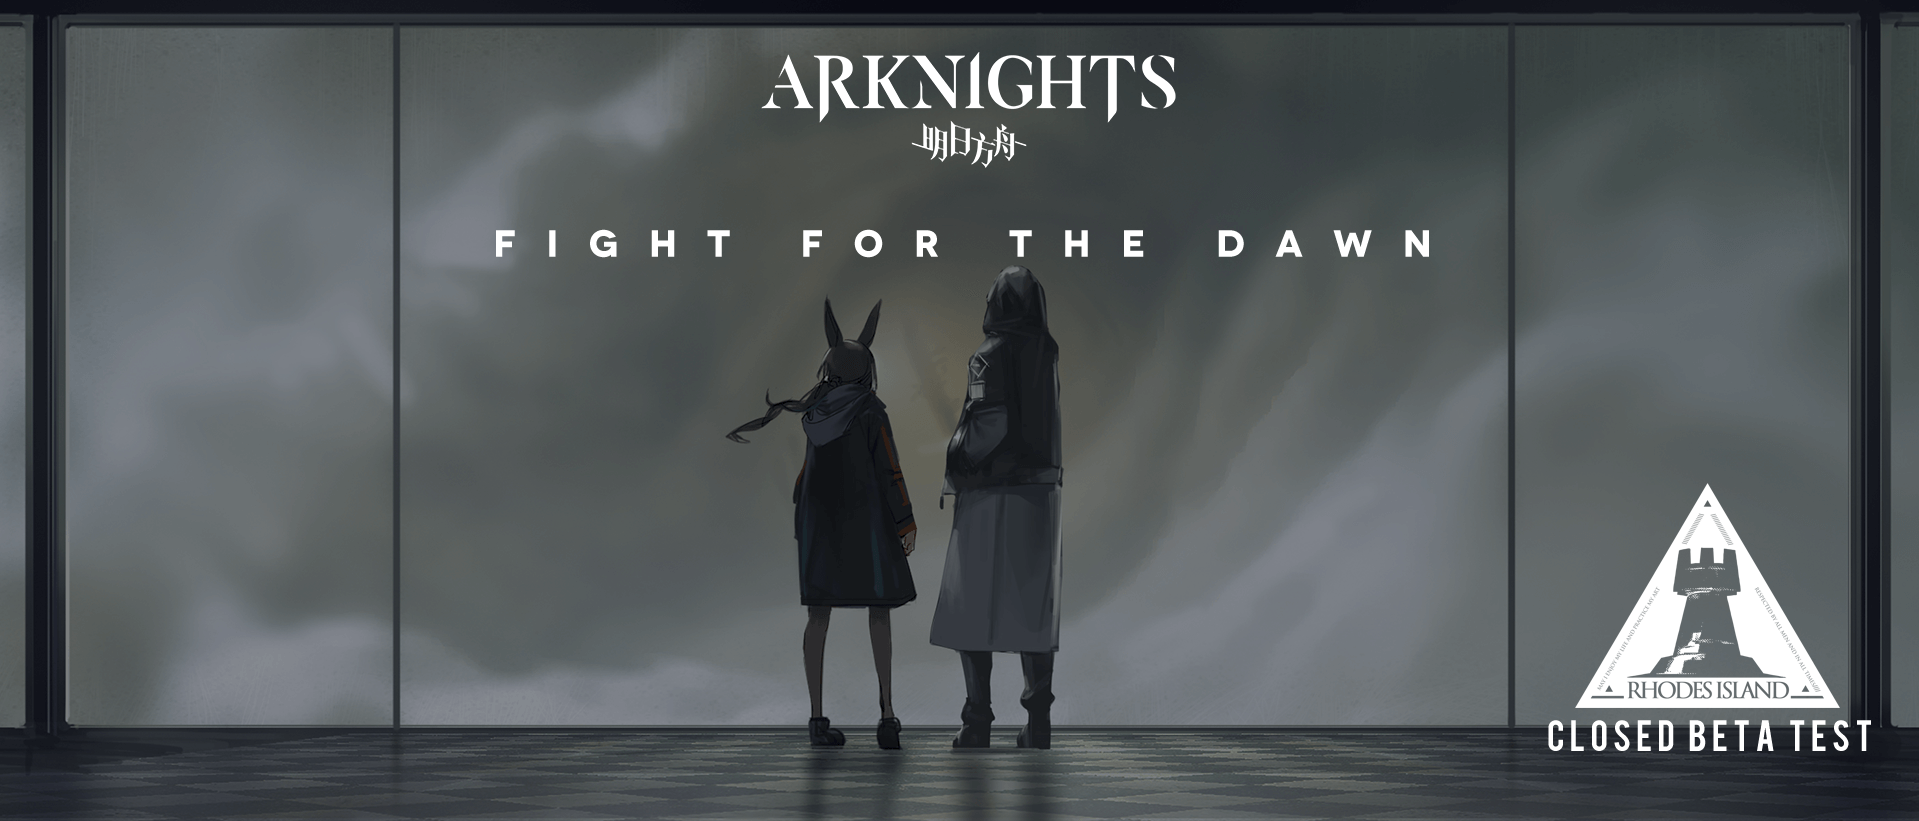 Download Arknights On Pc With Noxplayer Appcenter 8134